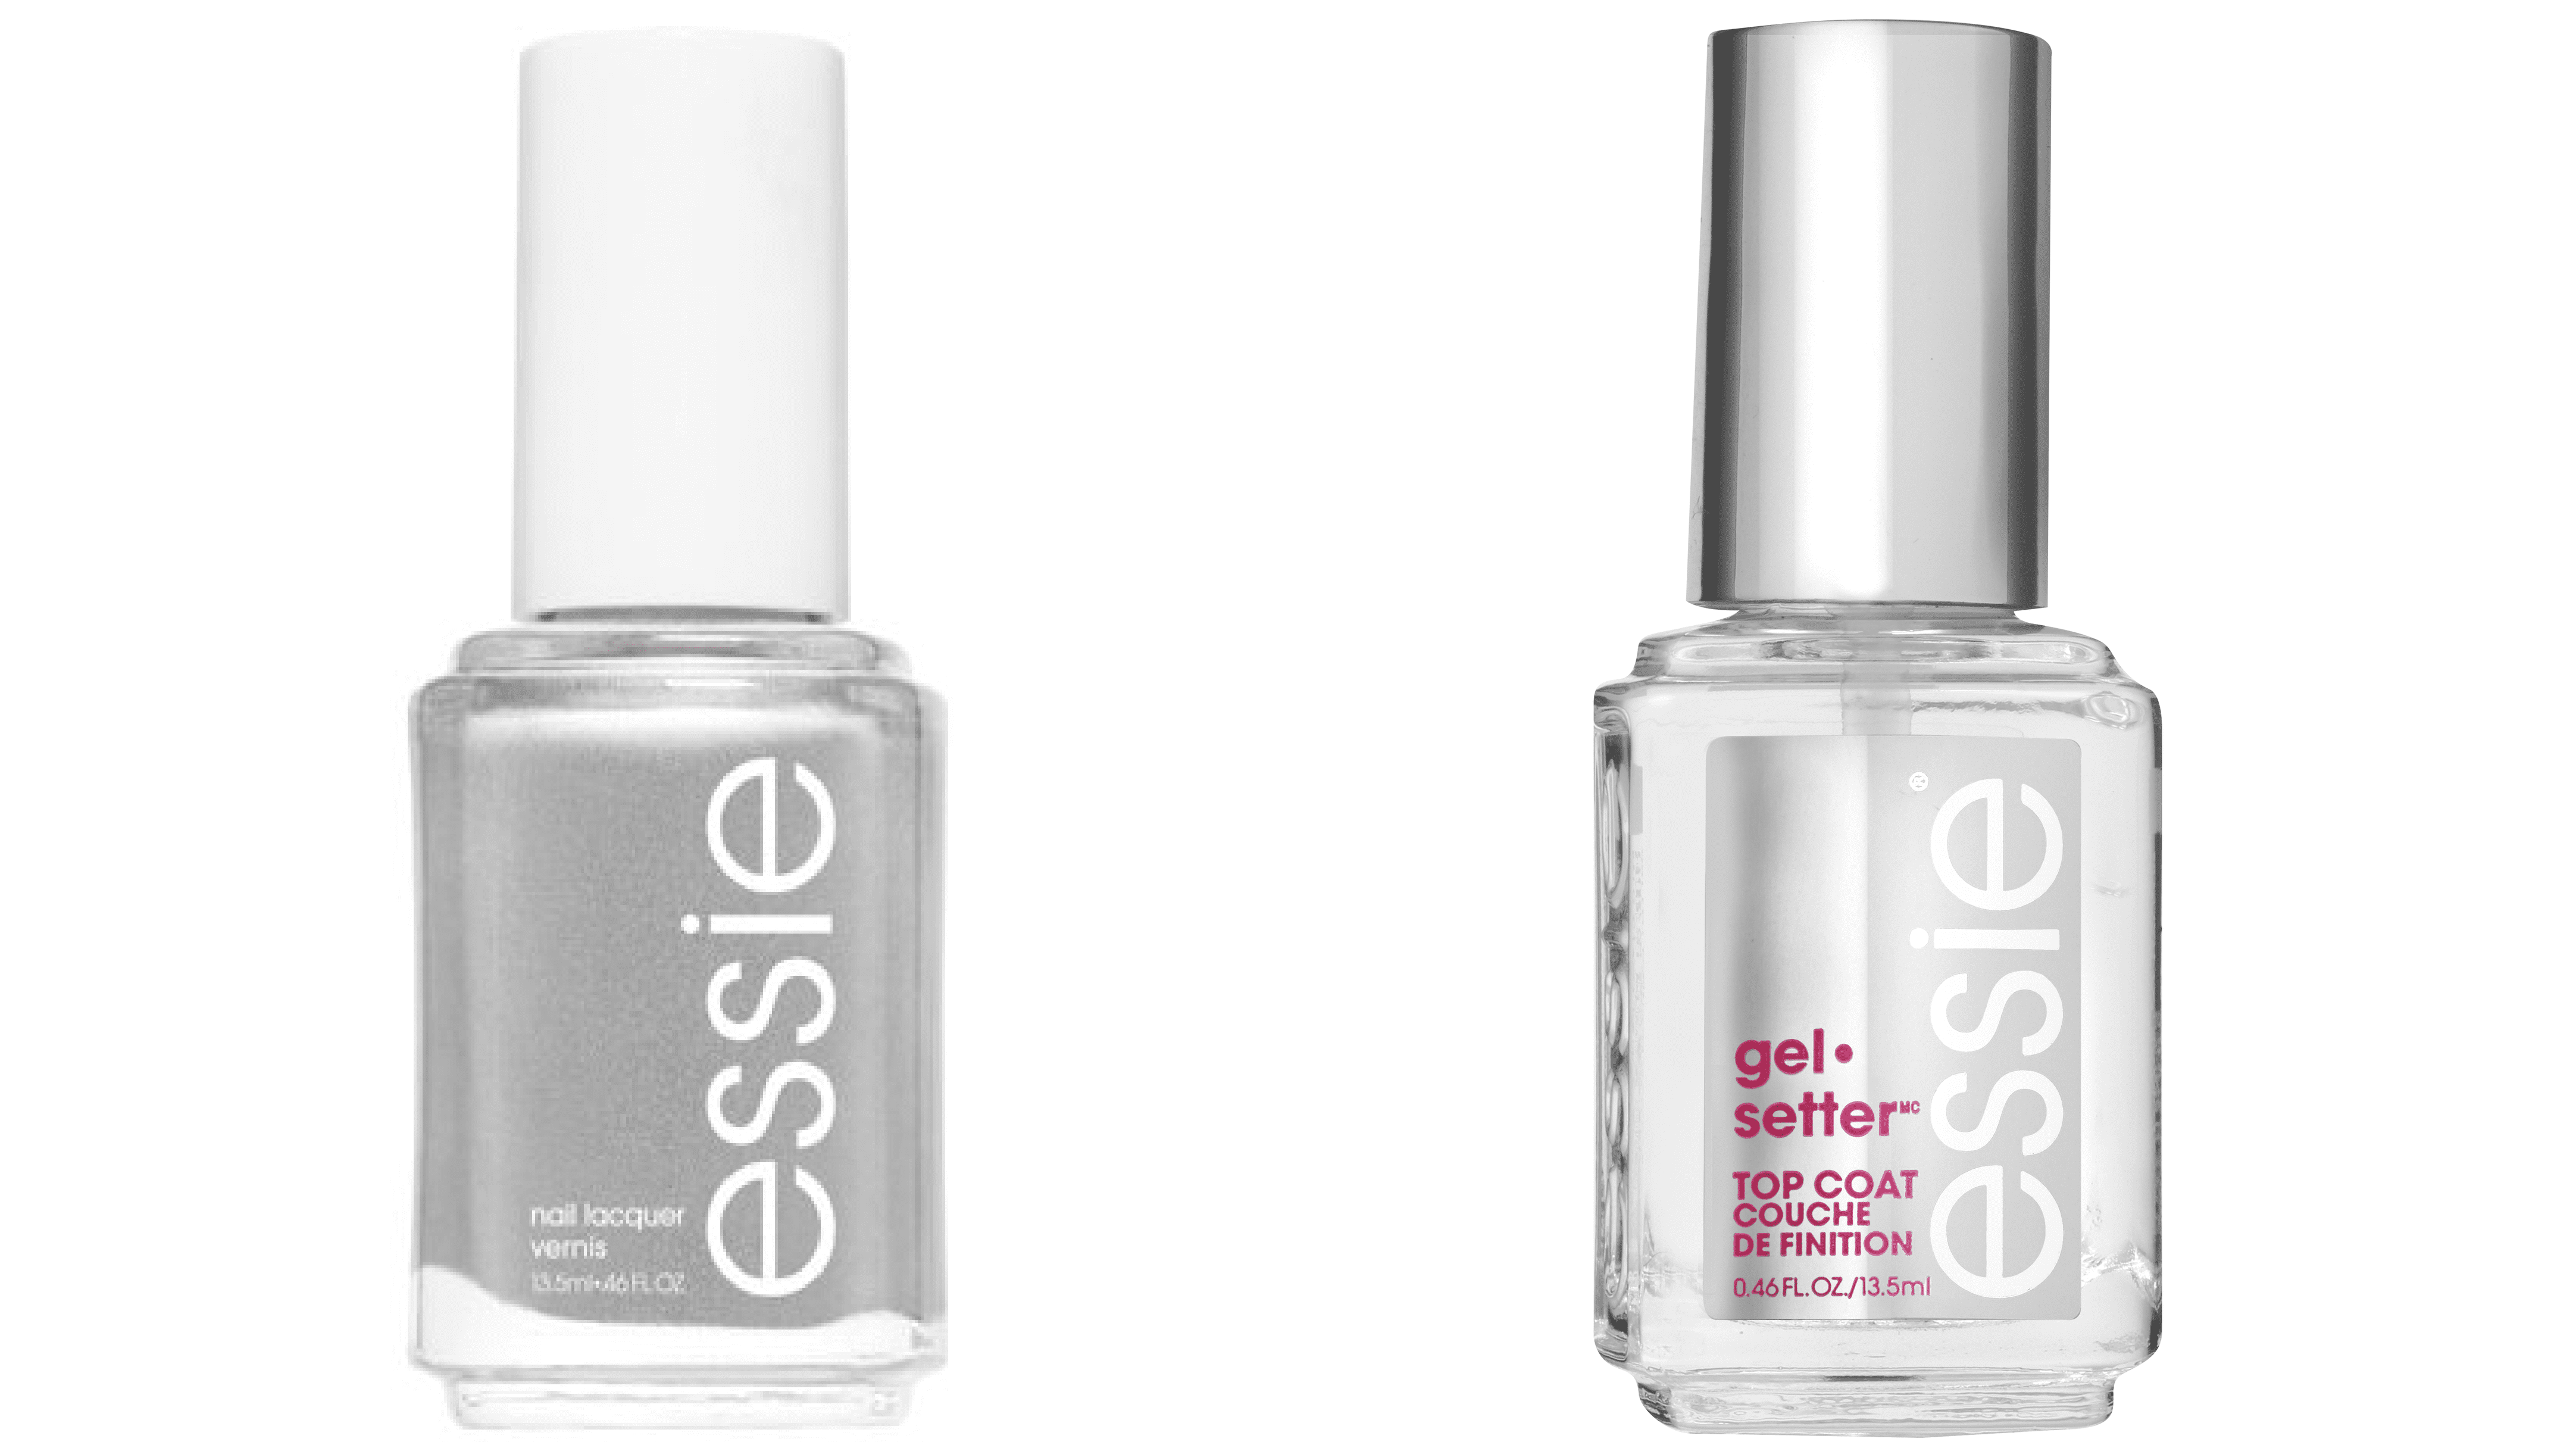 2. Essie Nail Polish in "No Place Like Chrome" - wide 7